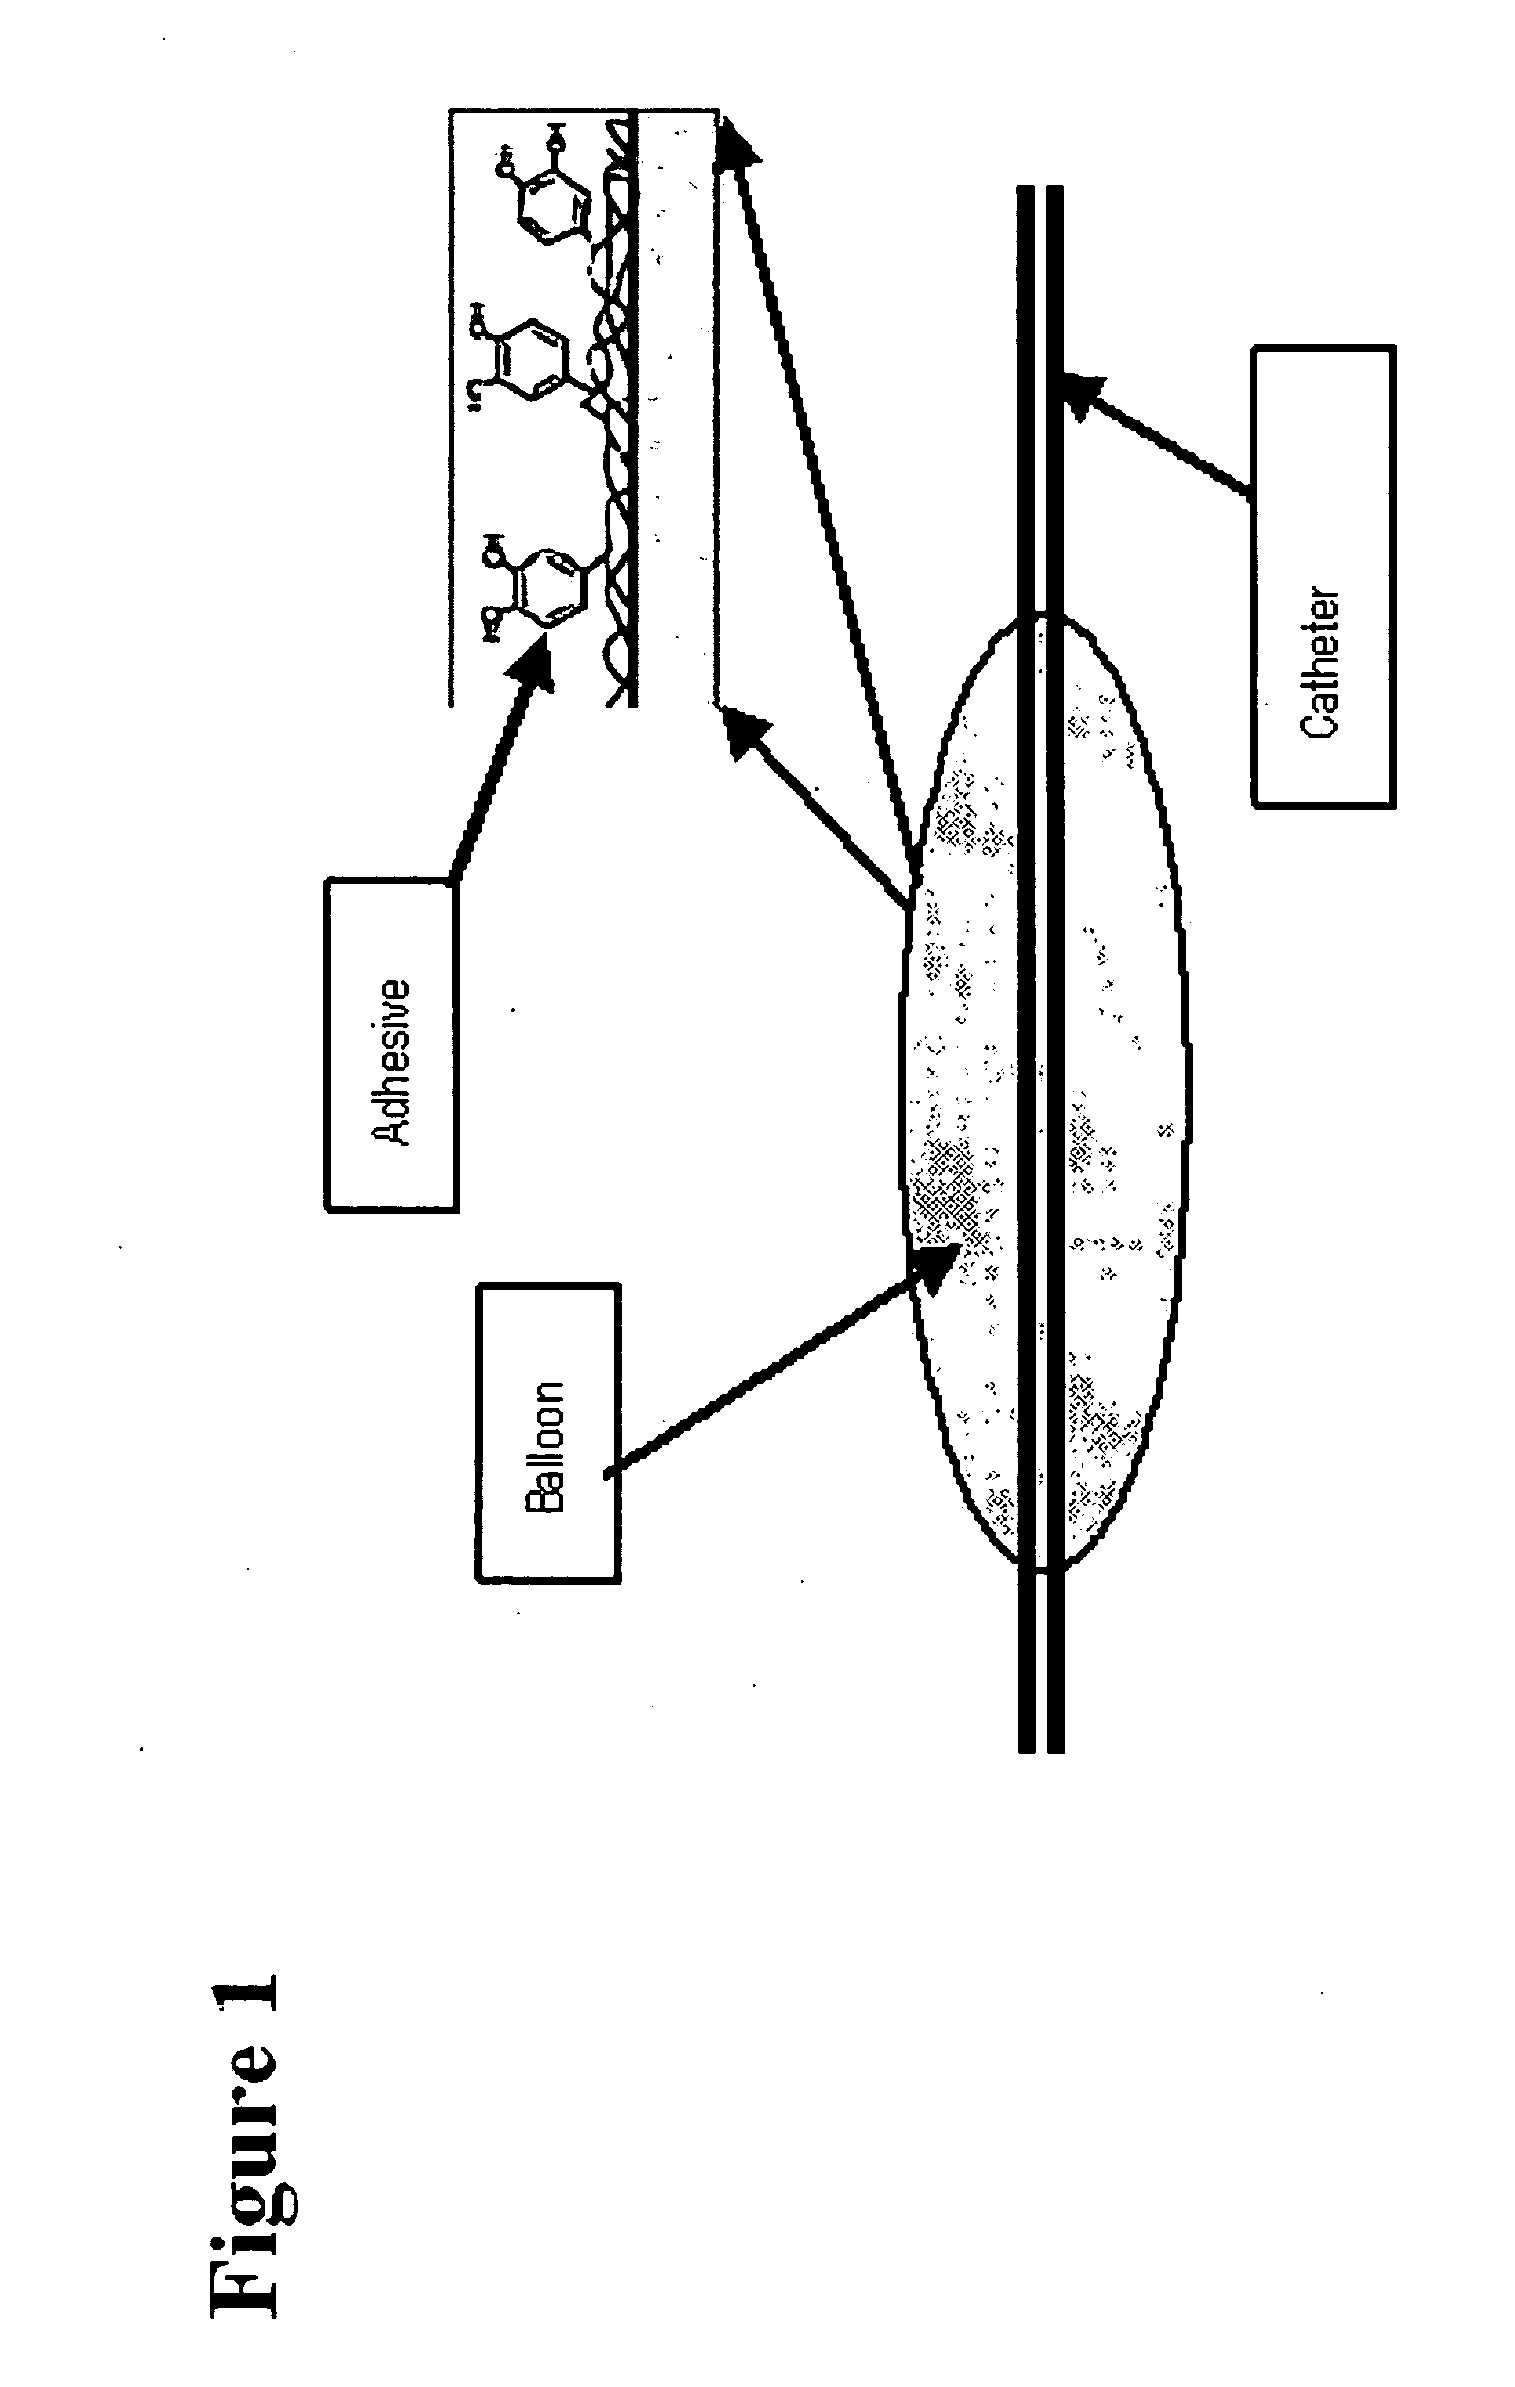 Sticky dilatation balloon and methods of using